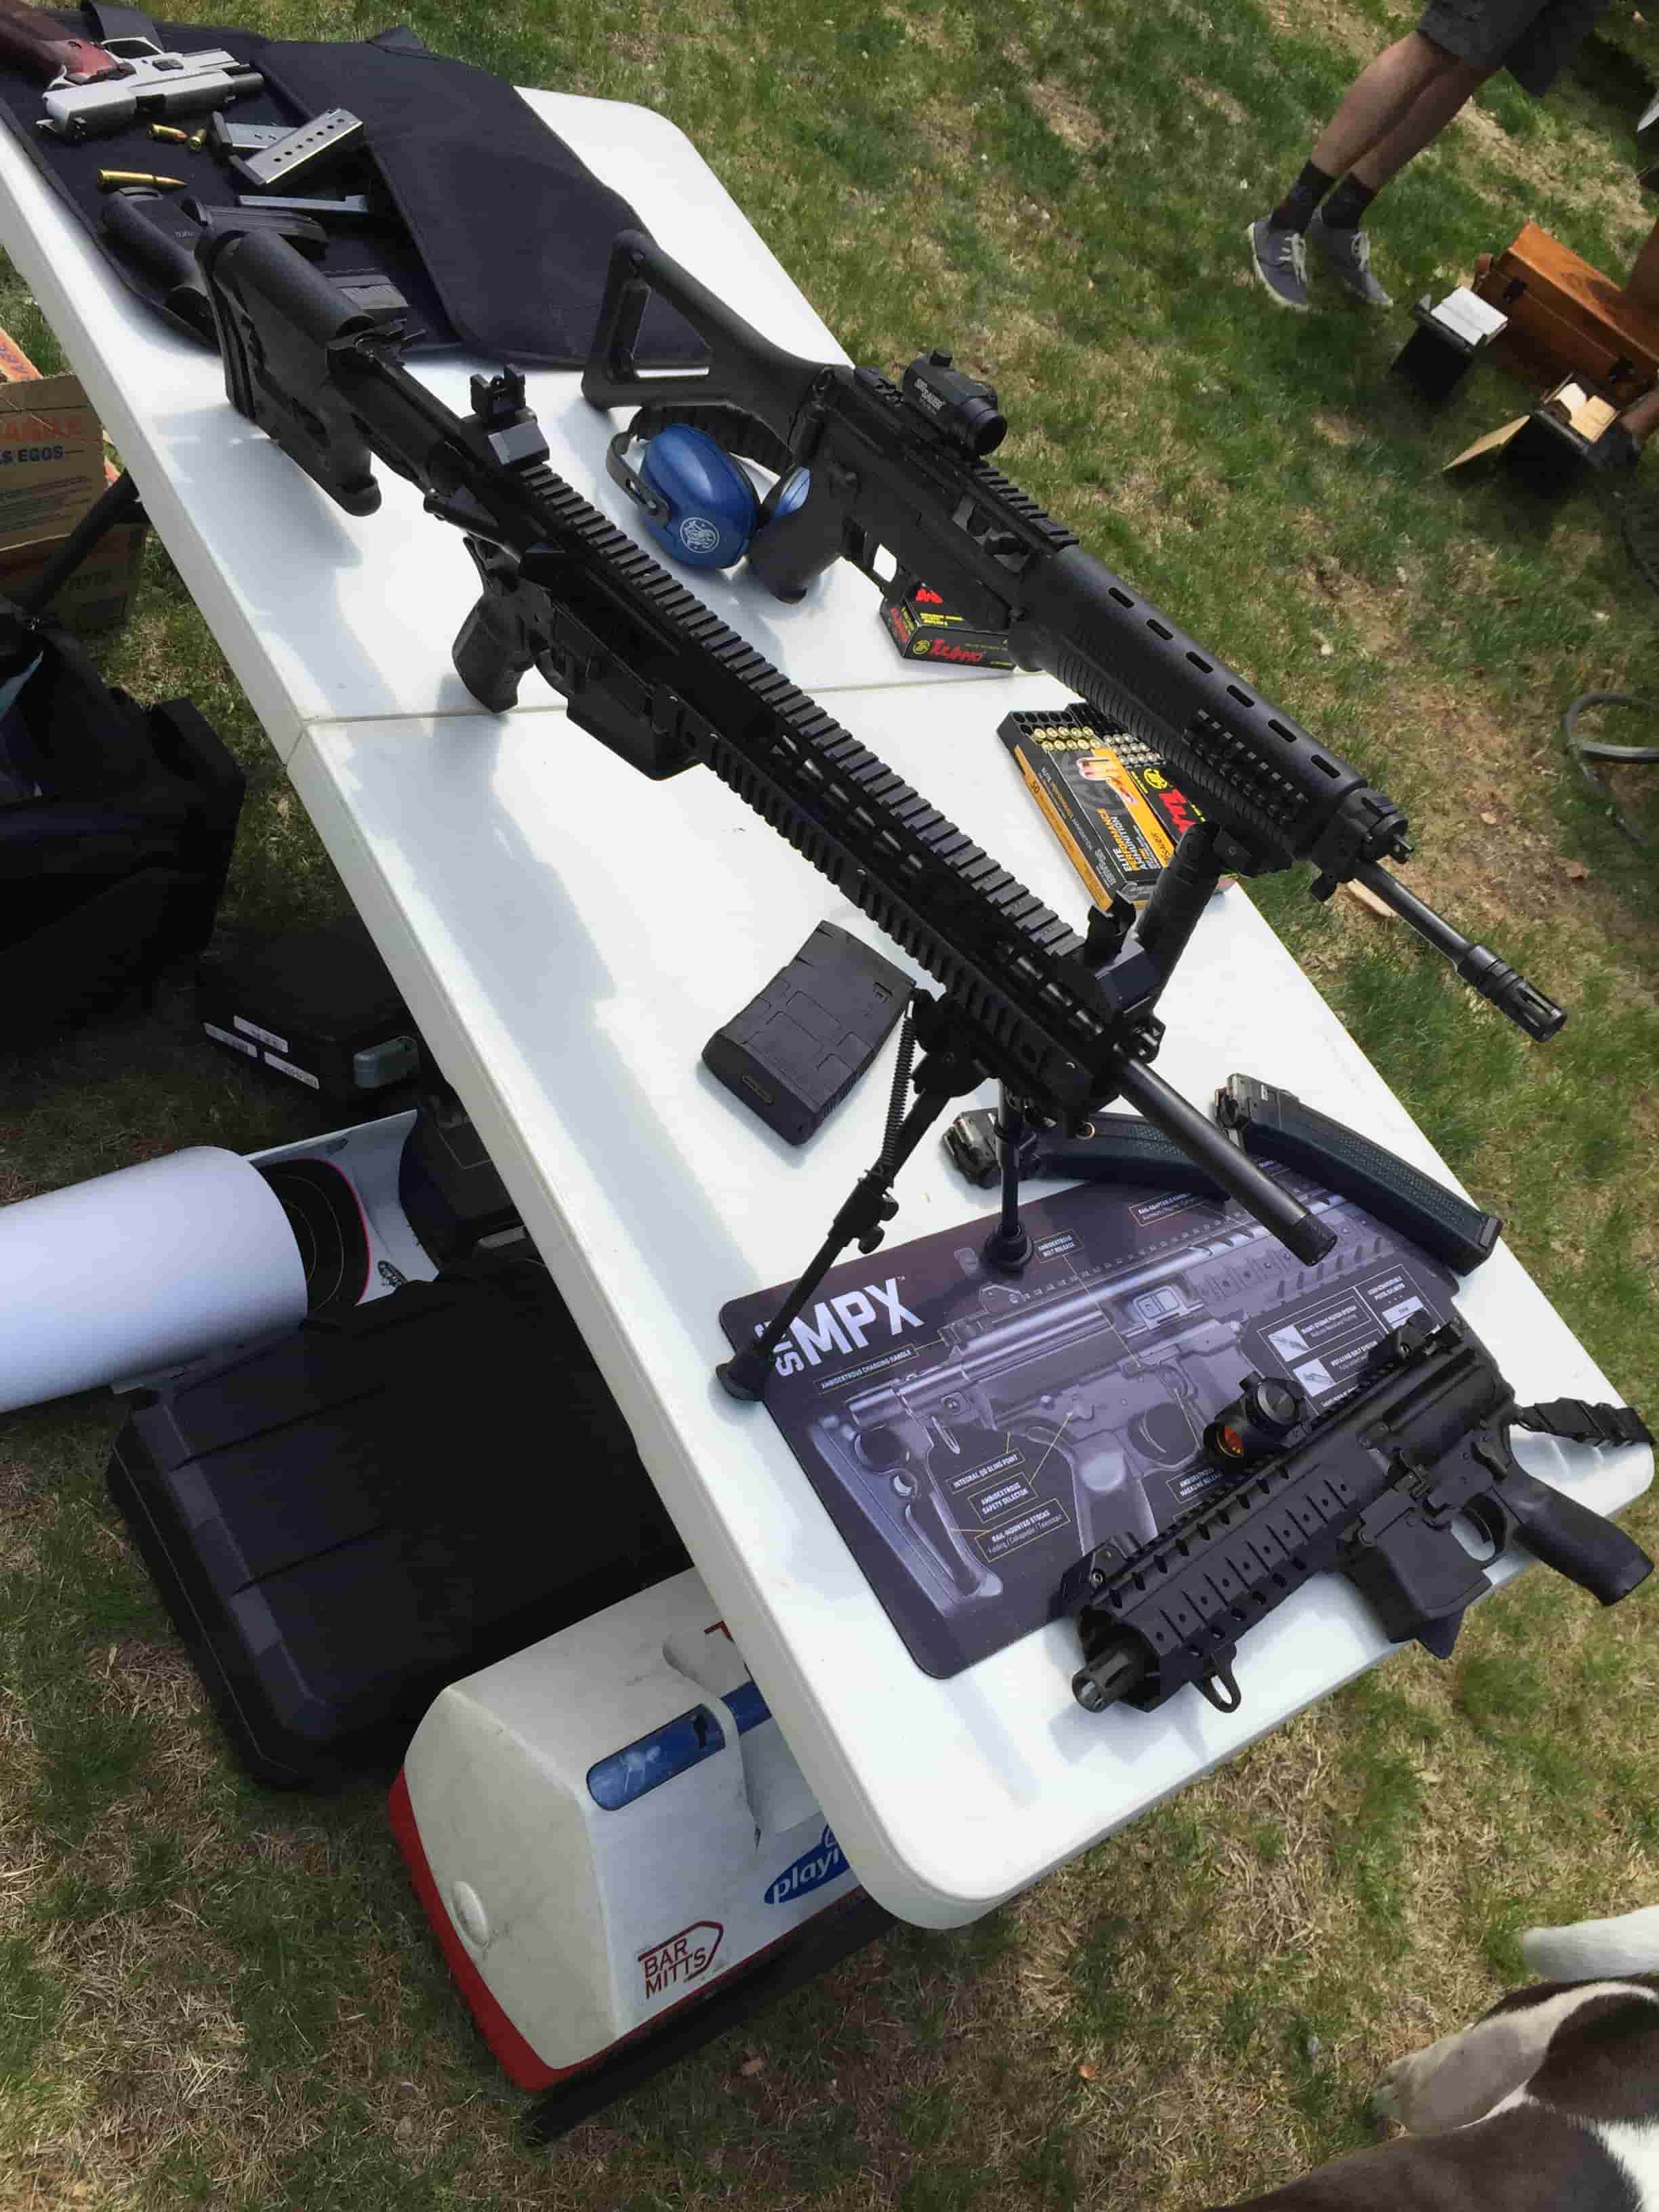 Downward distorted view of a table with firearms on top